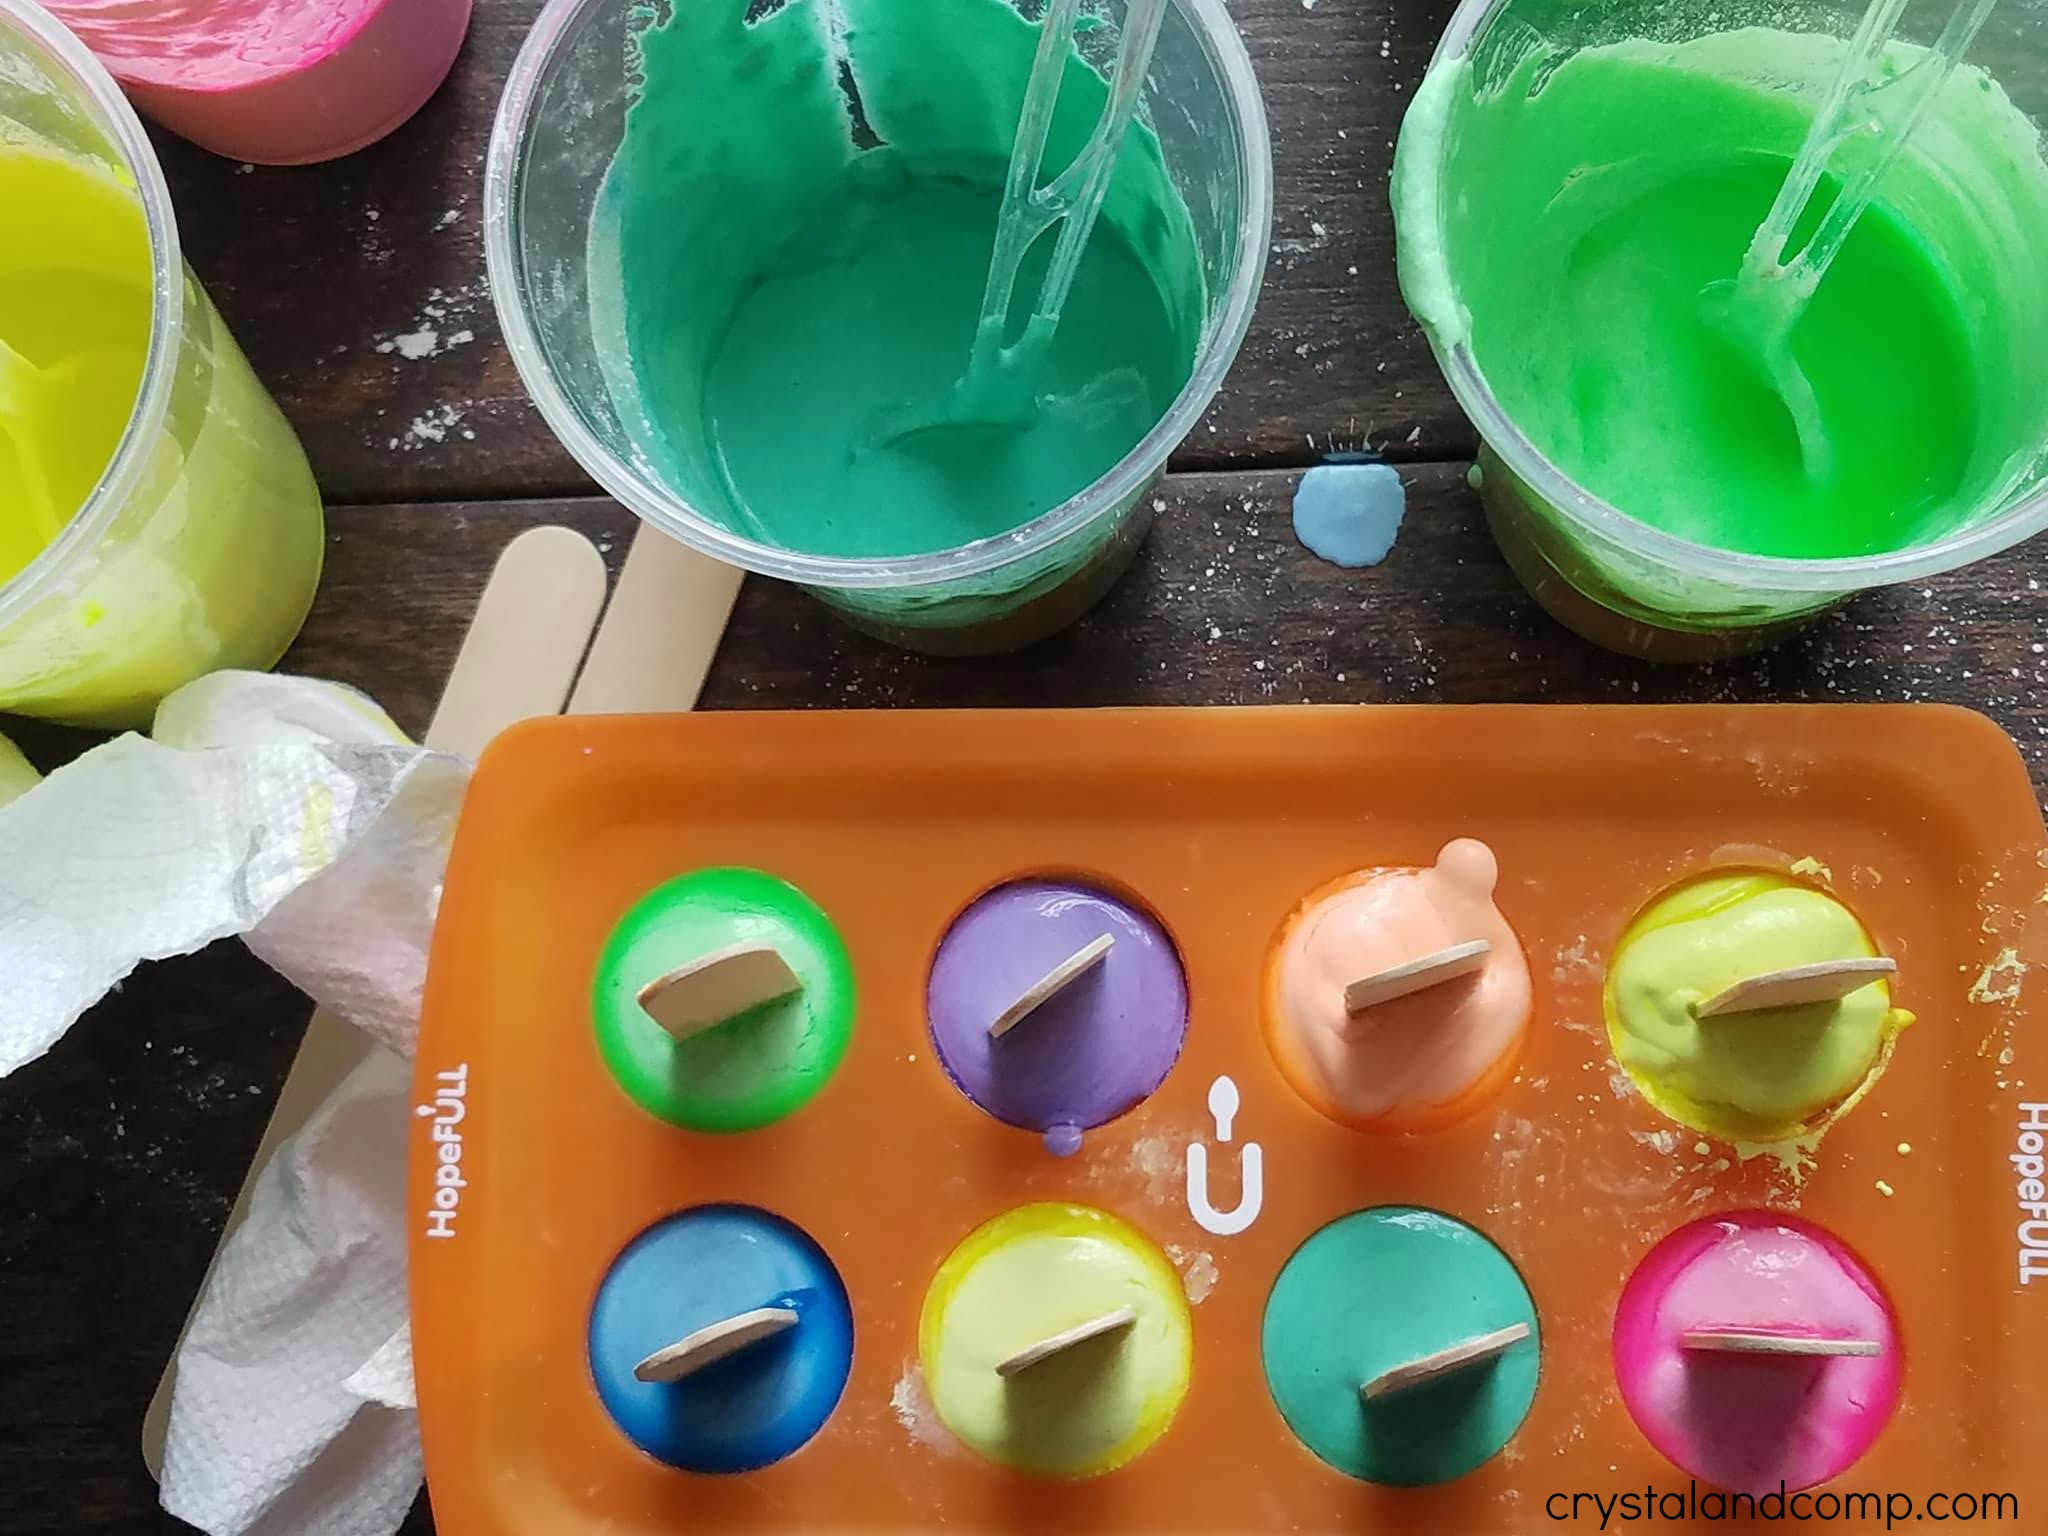 DIY Sidewalk Chalk Paint With Ingredients You Already Have at Home! So Easy!